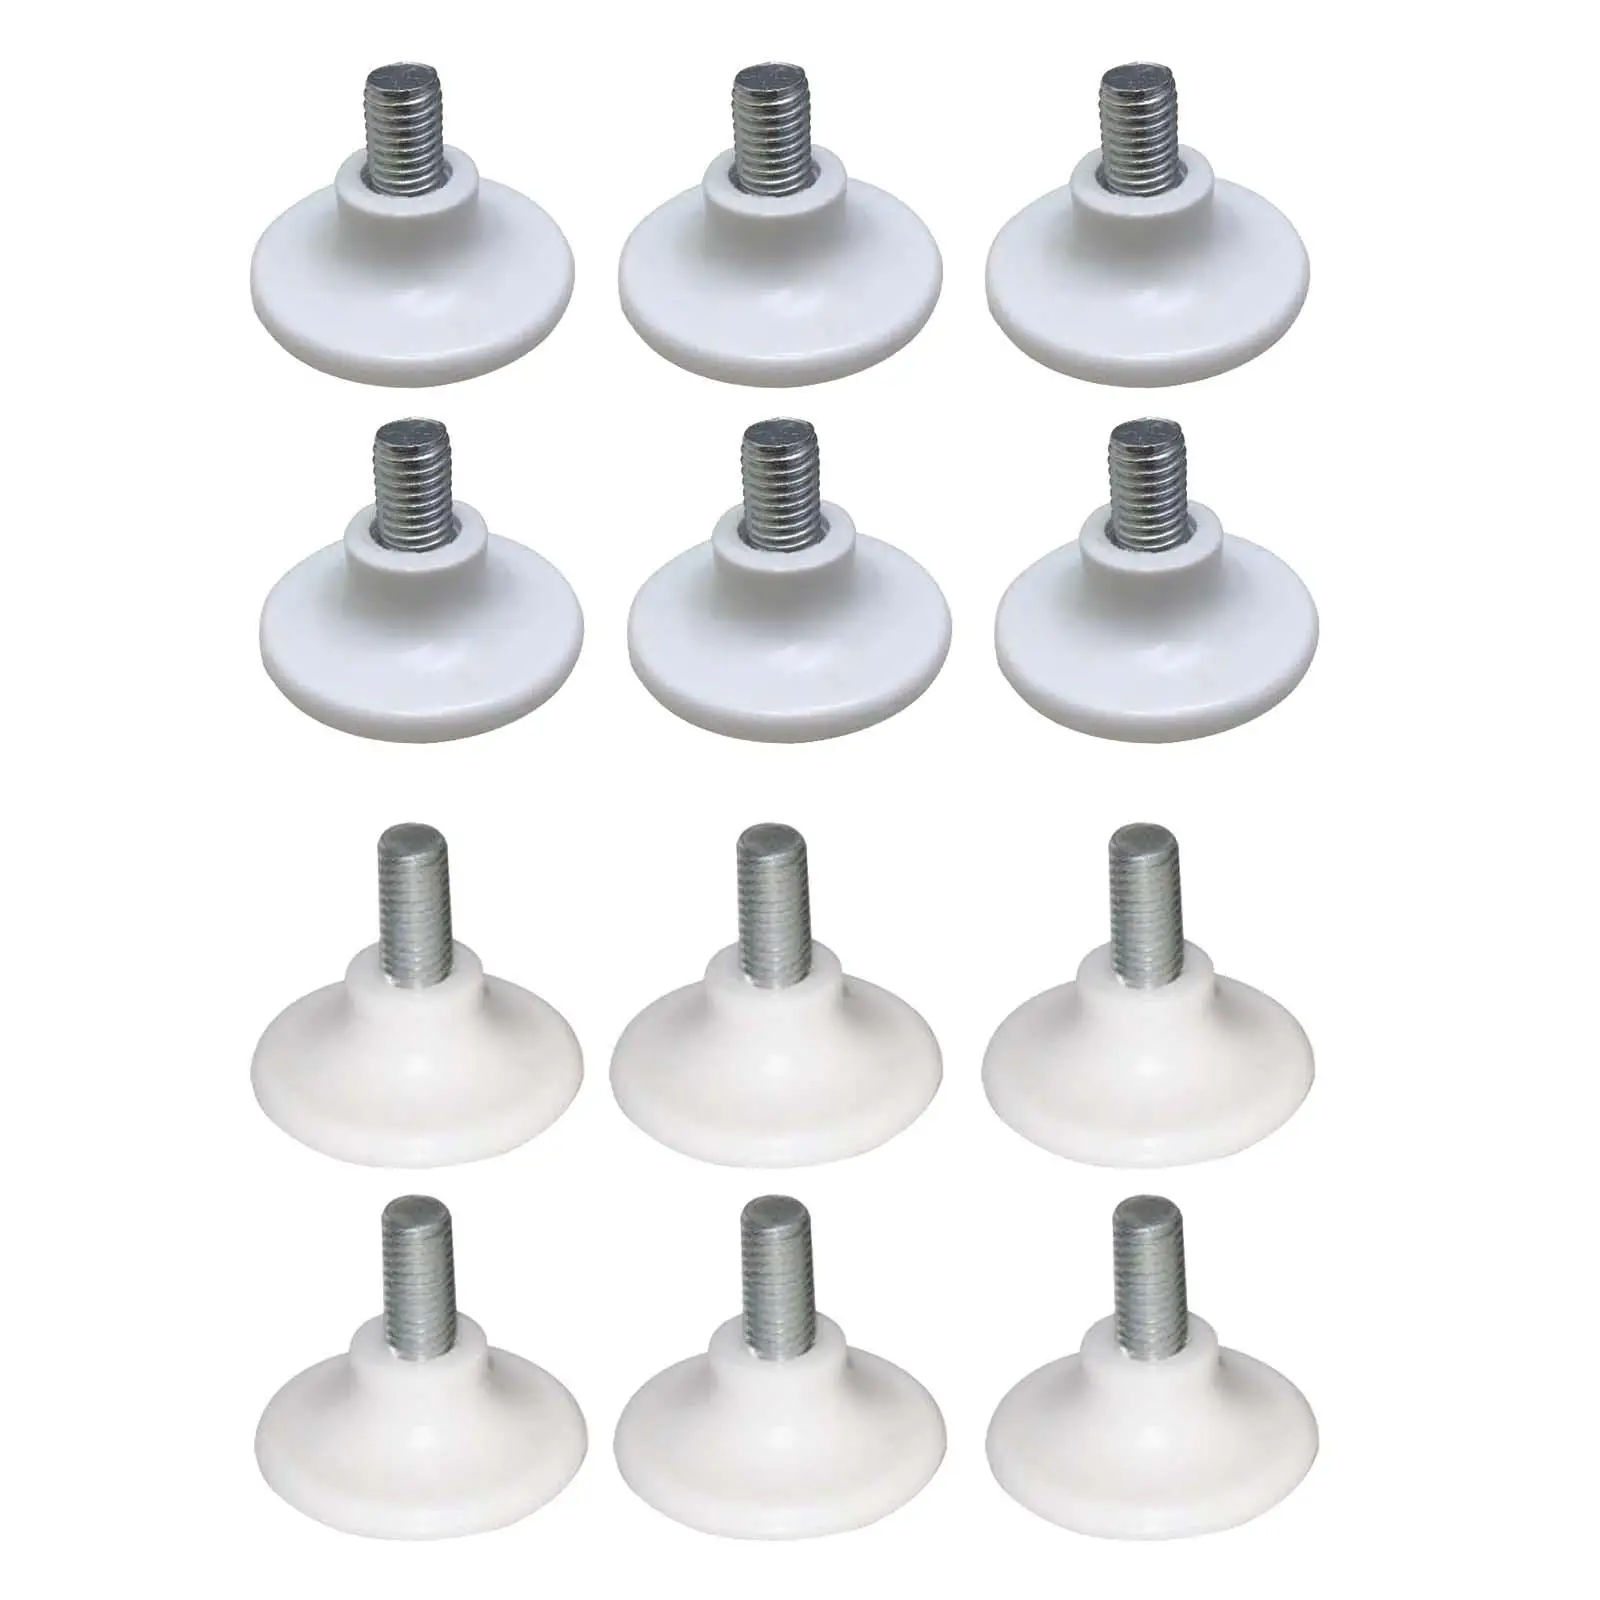 6 Pieces Furniture Levelers Table Feet Levelers for Table